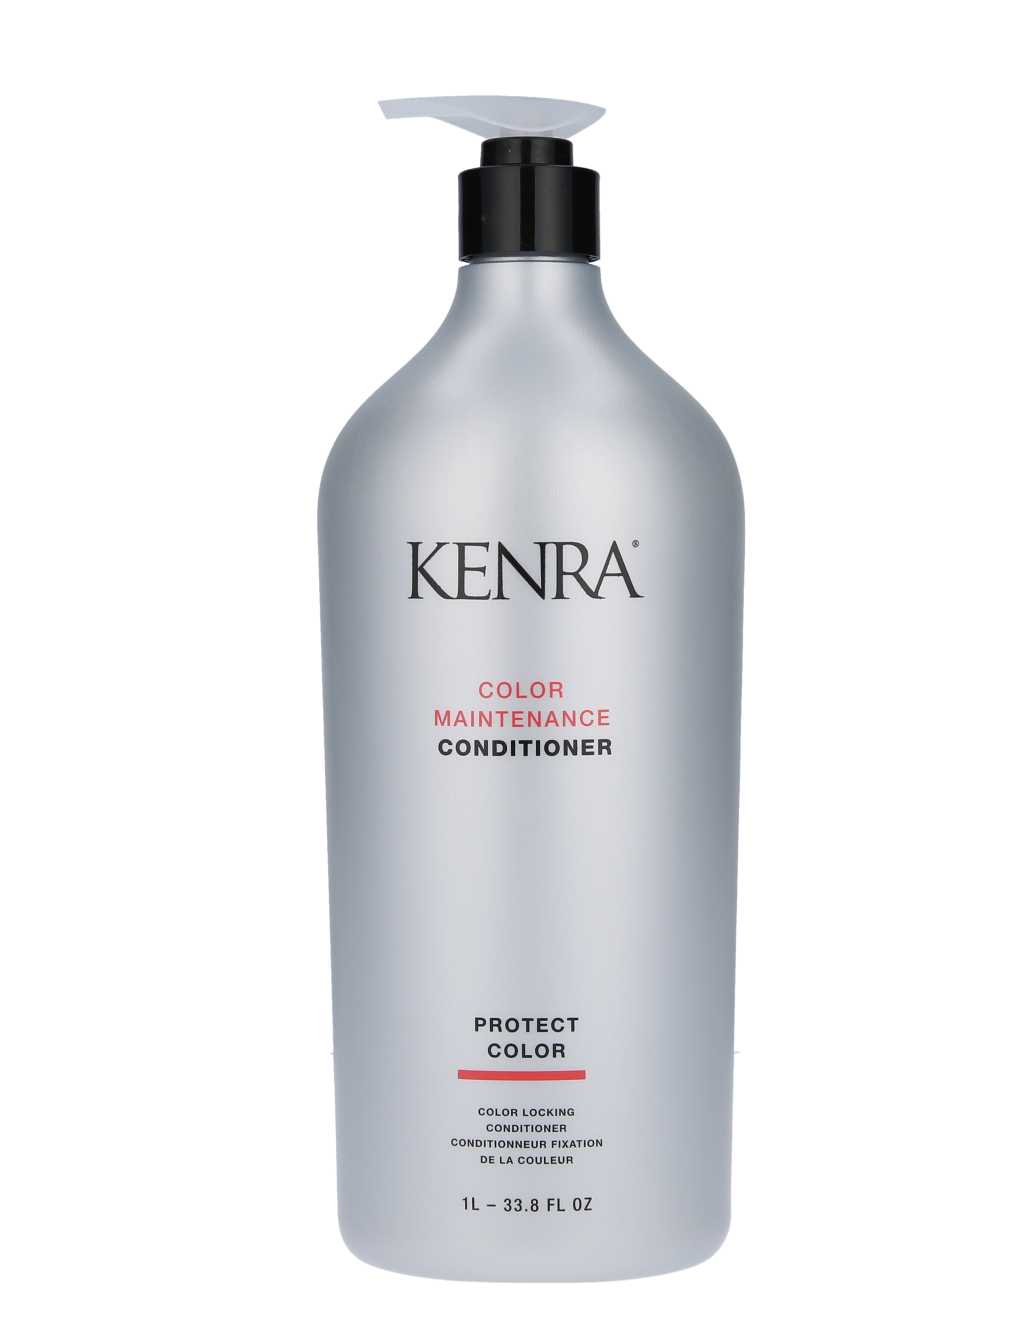 Primary image for Kenra Color Maintenance Conditioner, 33.8 Oz.